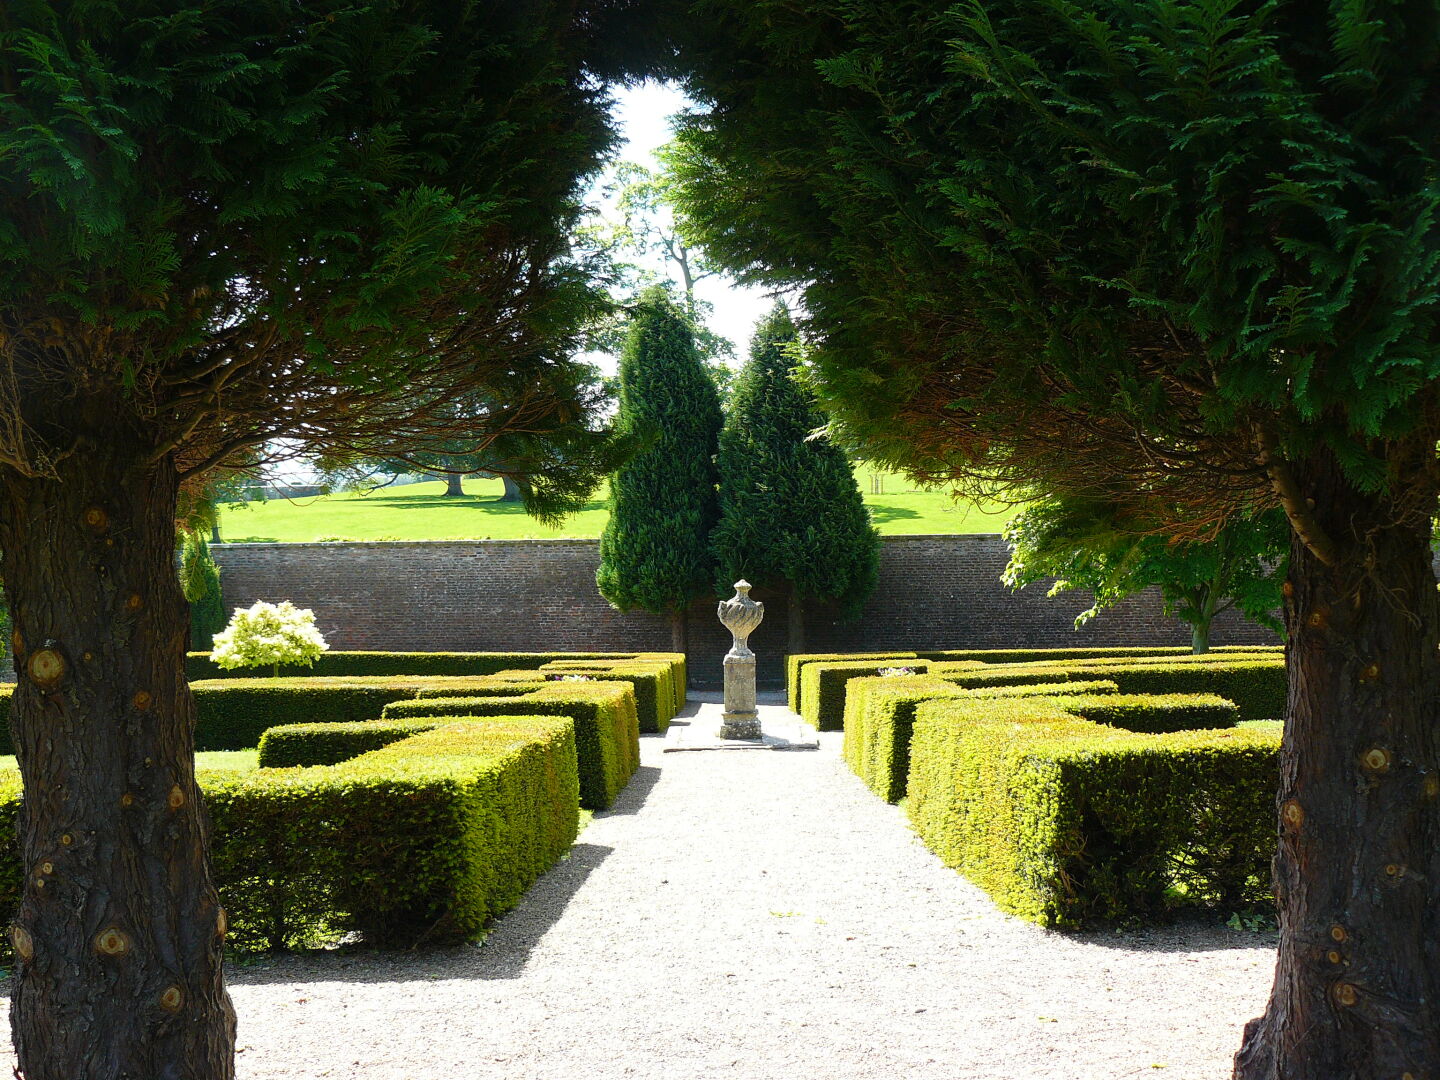 Raby Castle has nice walled gardens in its park.